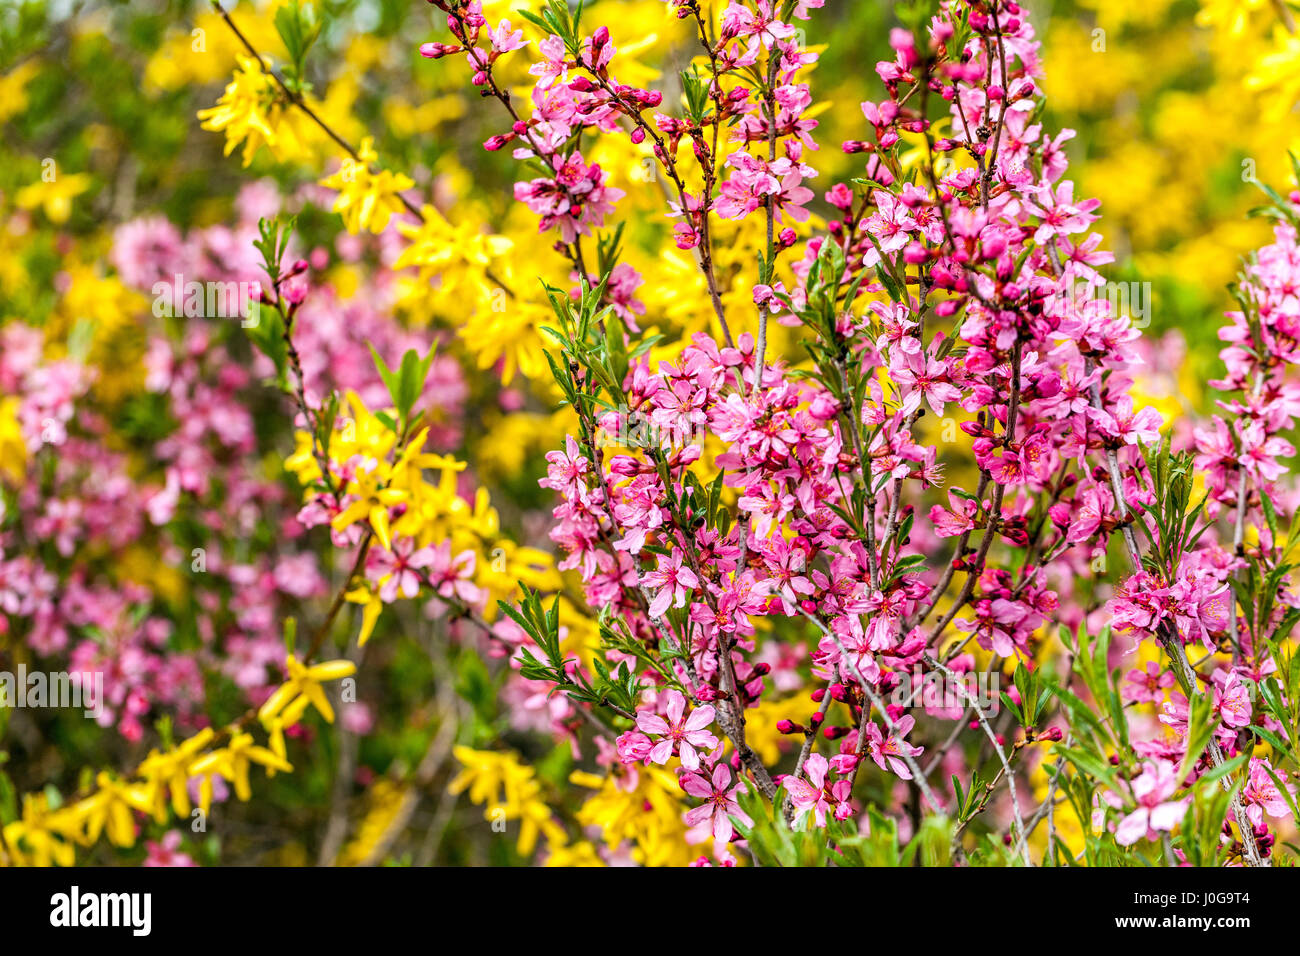 Prunus tenella Fire Hill Dwarf Russian almond Yellow Forsythia Pink Flowers April garden Flowering Shrubs Blossoms Spring Branches Blooming Shrub Stock Photo